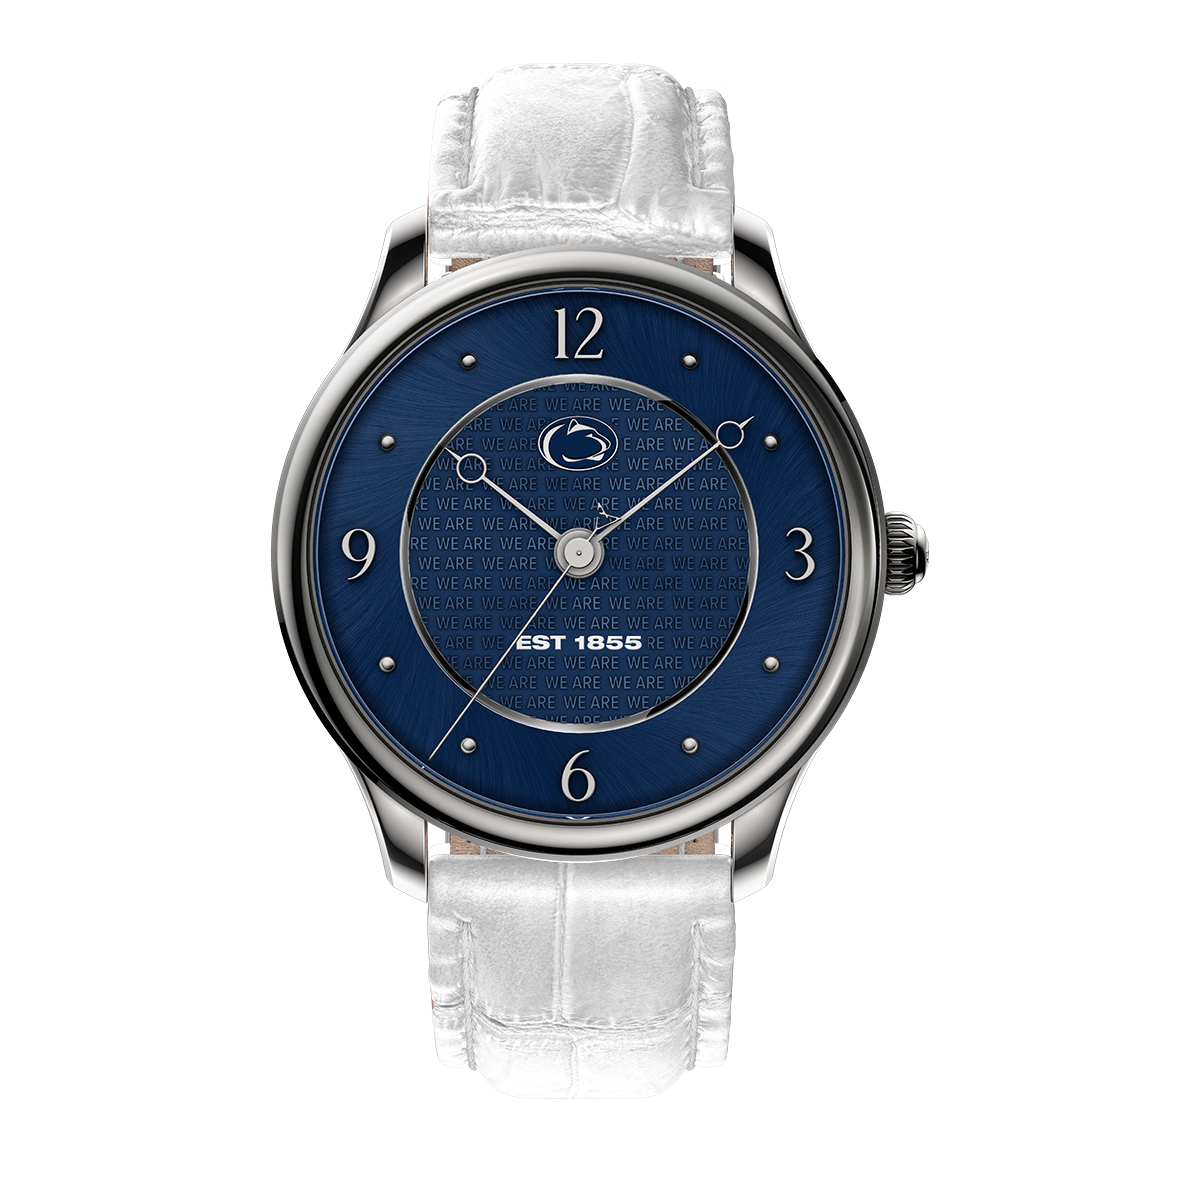 Penn State University Aletheia II. Swiss Made Automatic Watch. Front view. White apple leather strap.